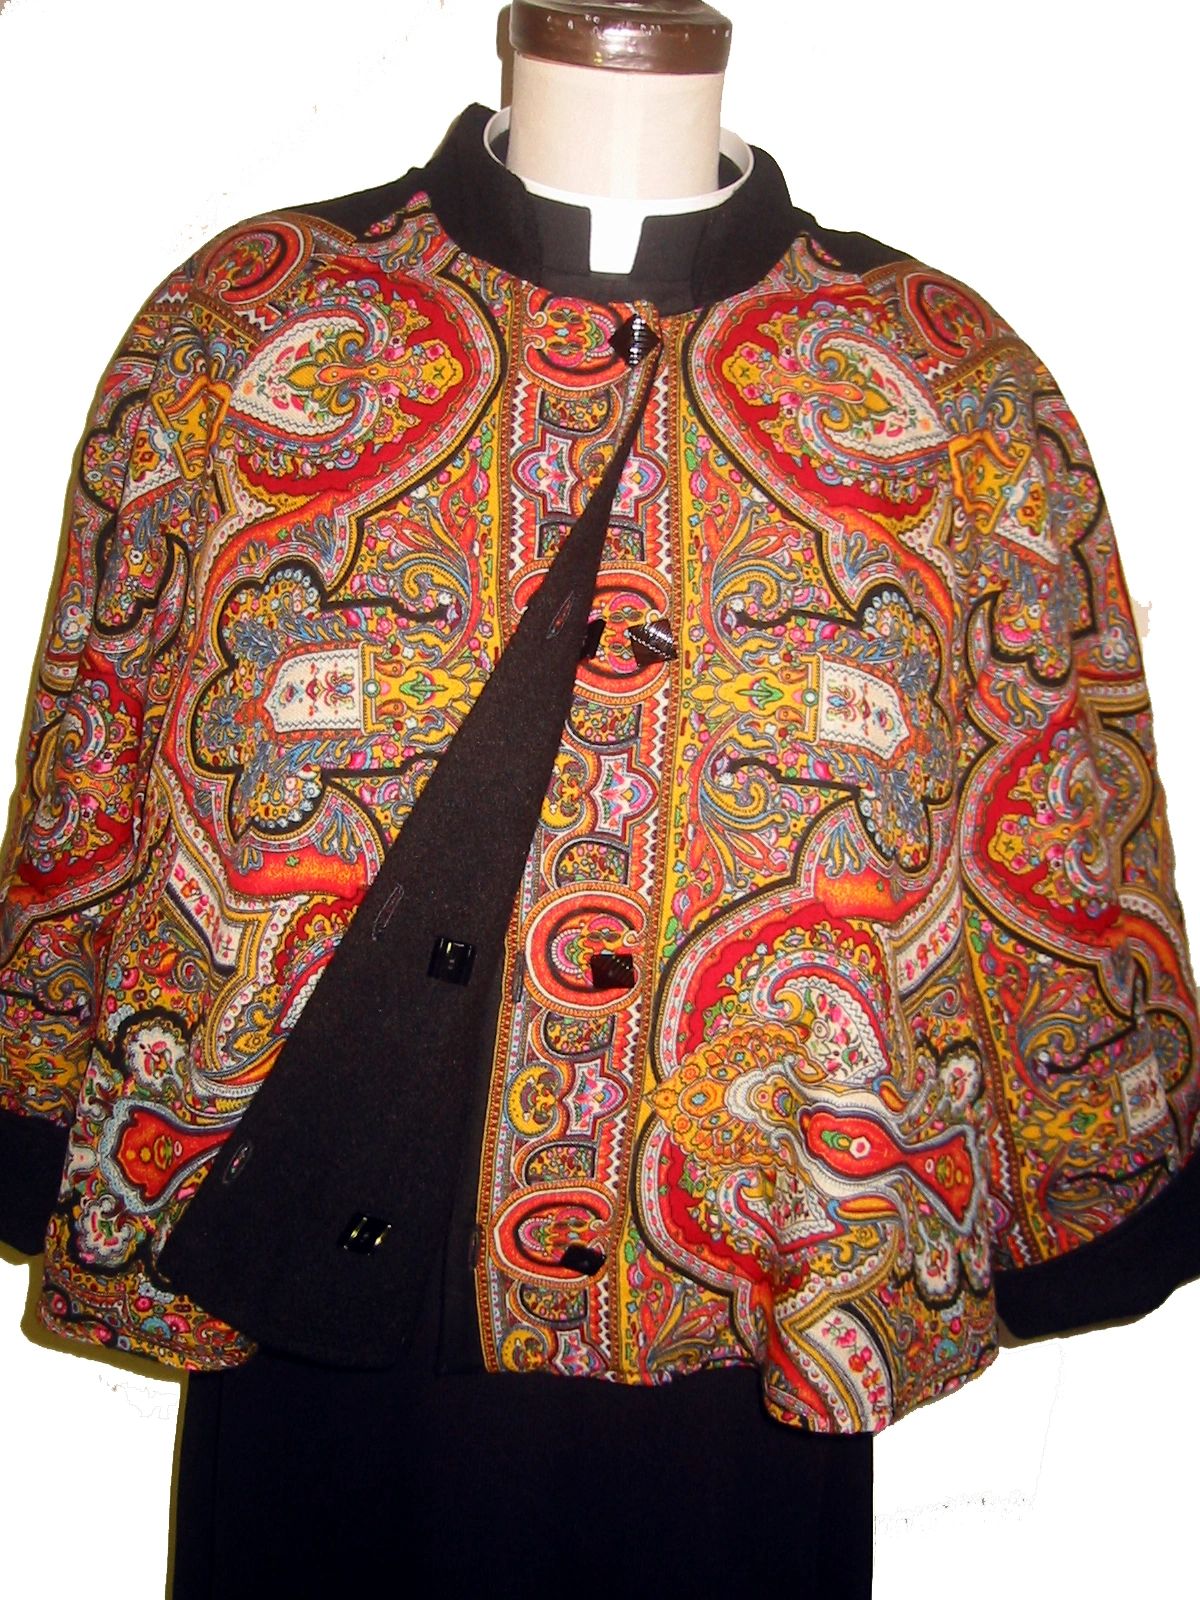 3Stained_GLASS_Jacket.jpg